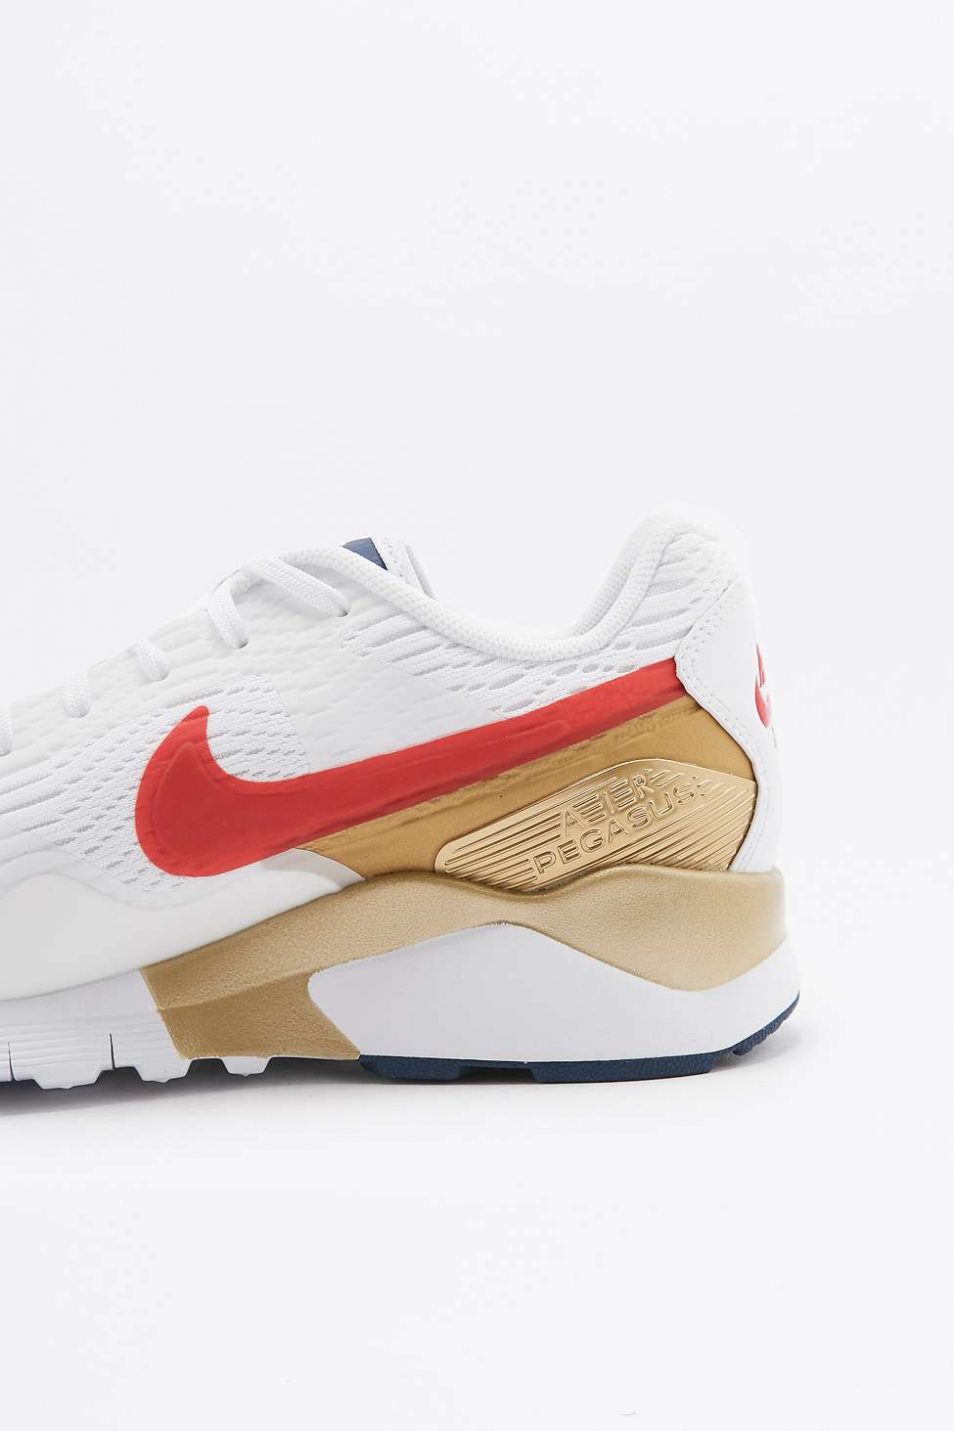 Nike Air Pegasus 92 Red Gold and Blue Trainers 3